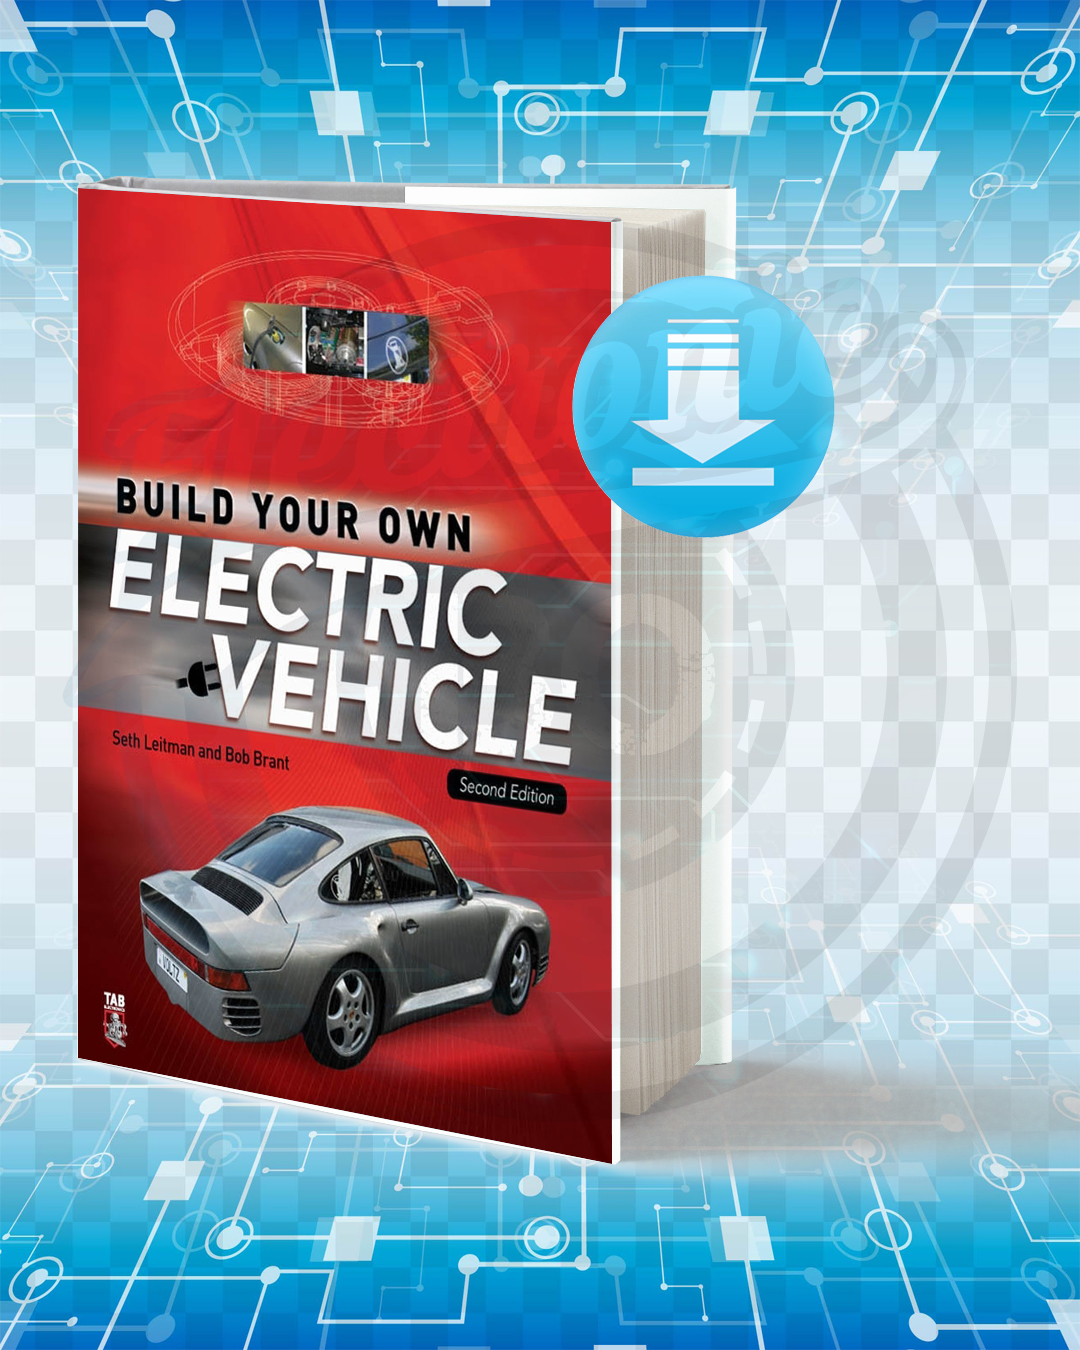 Download Build Your Own Electric Vehicle.